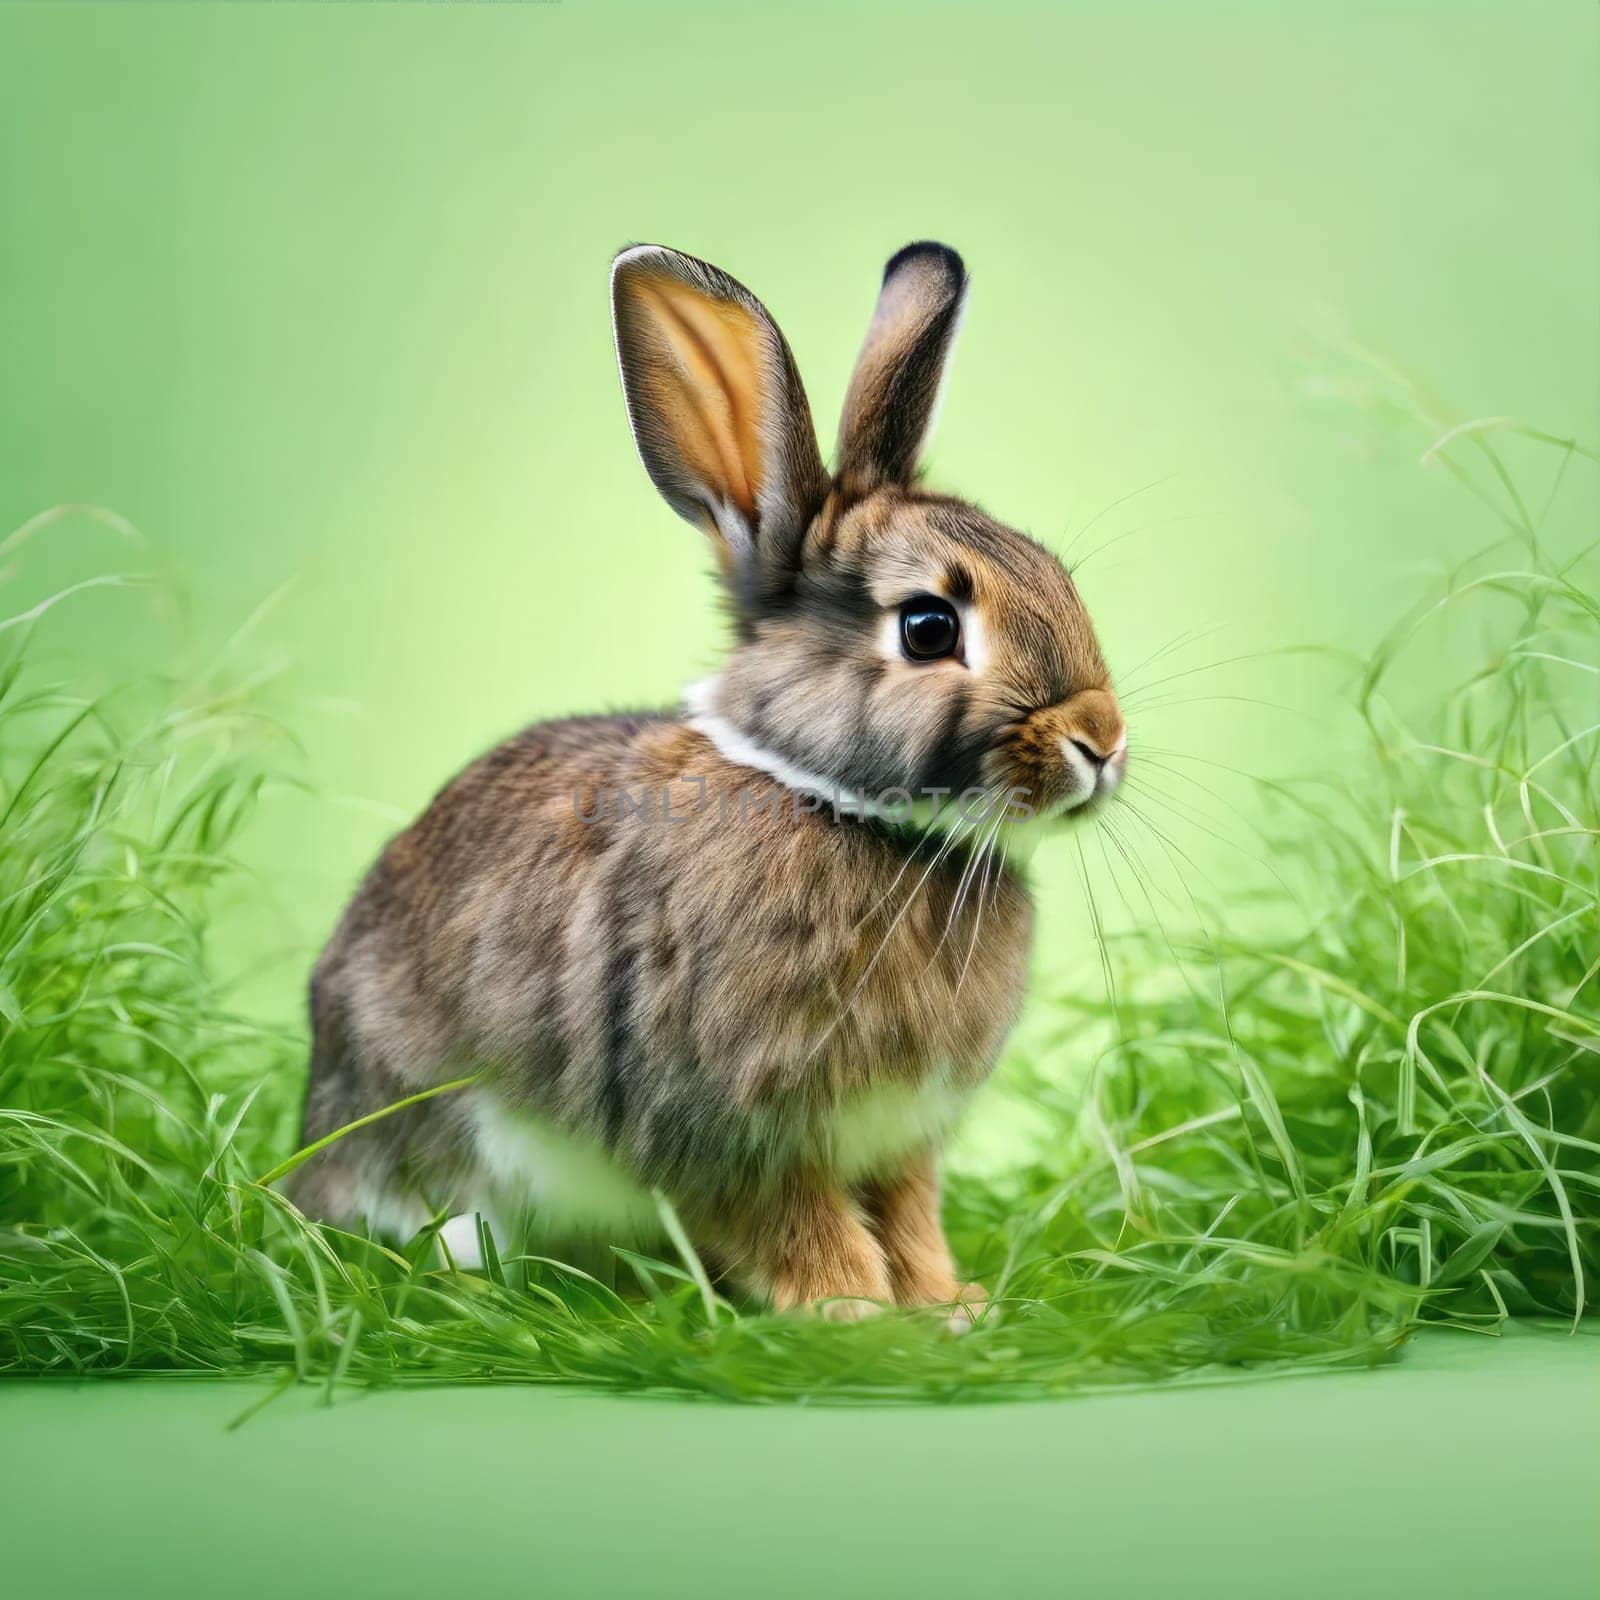 Easter bunny on grass on spring green background by natali_brill